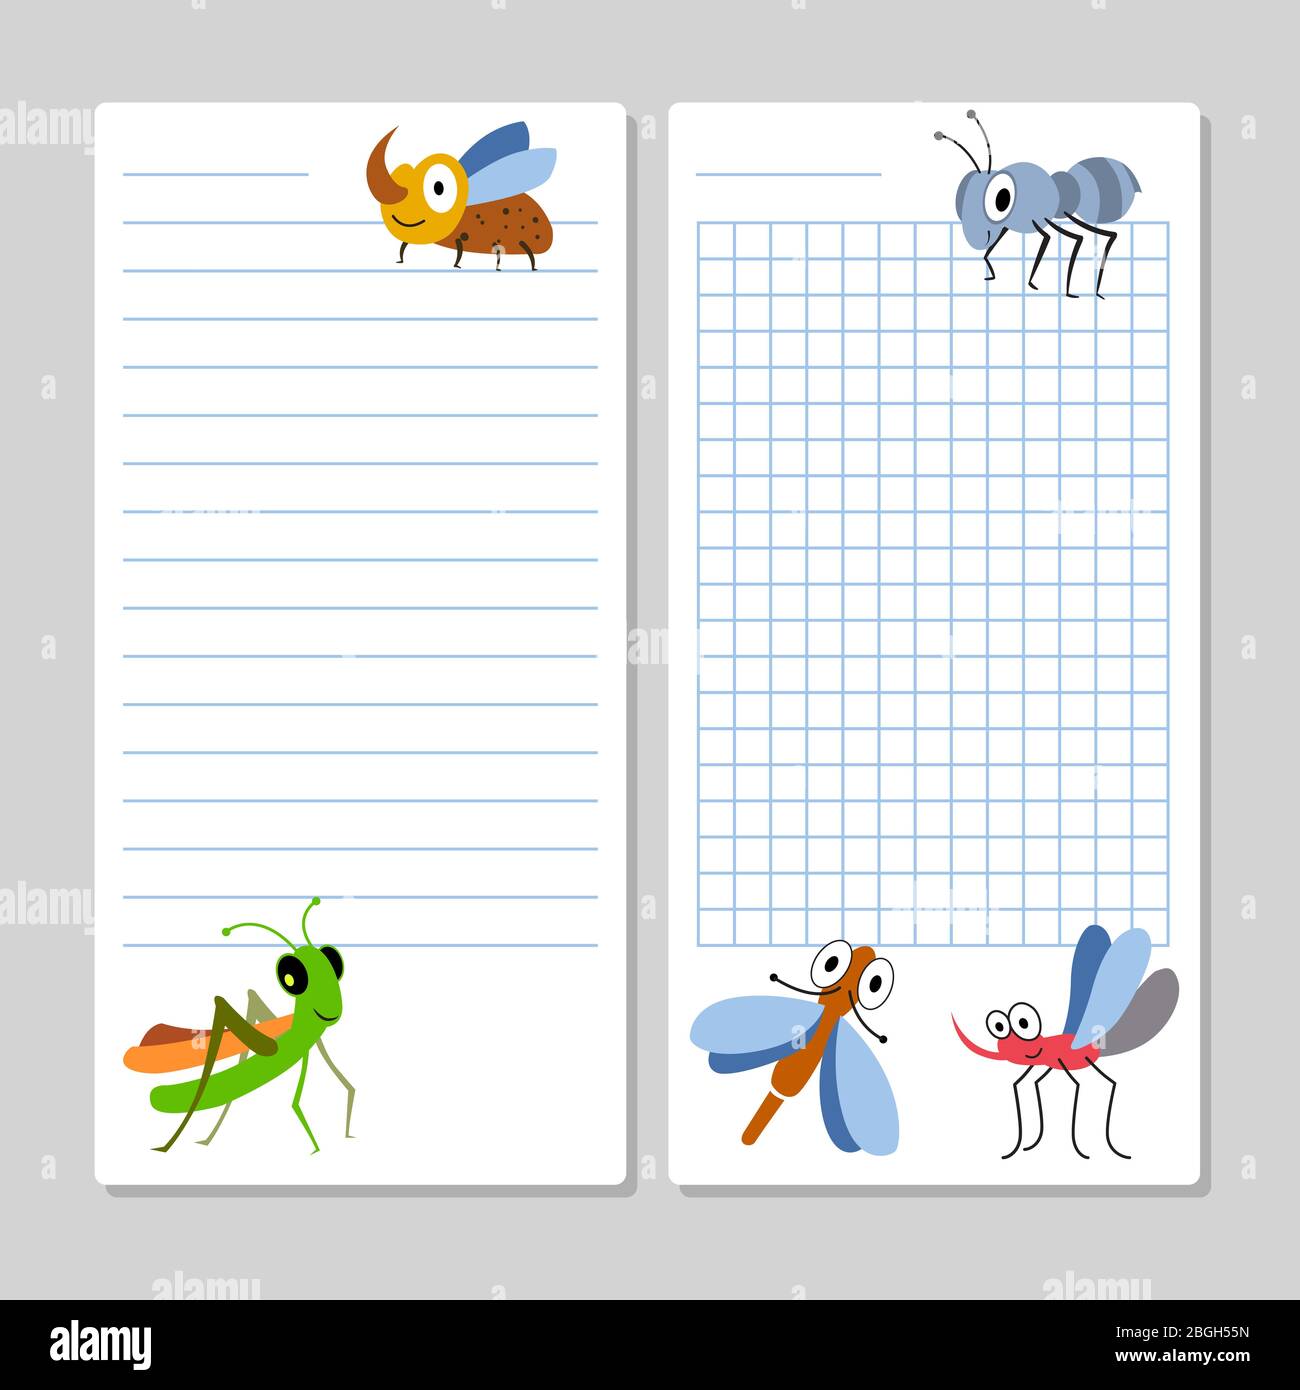 Lined notebook pages template with cartoon insects isolated. Vector illustration Stock Vector